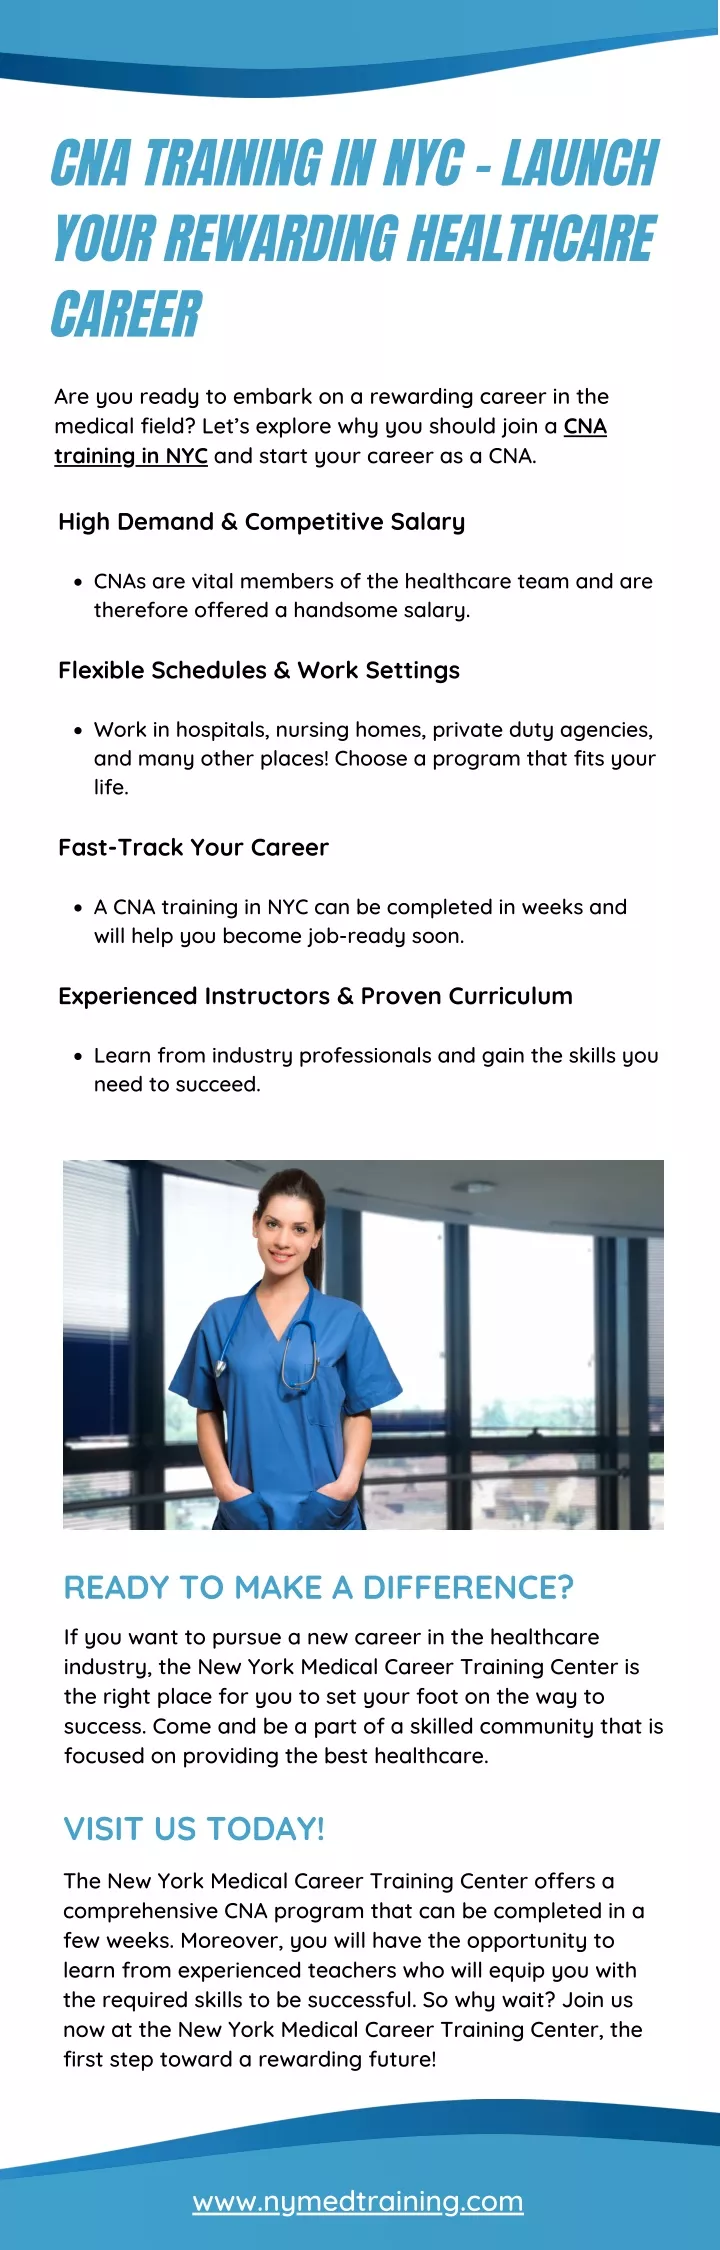 cna training in nyc launch your rewarding